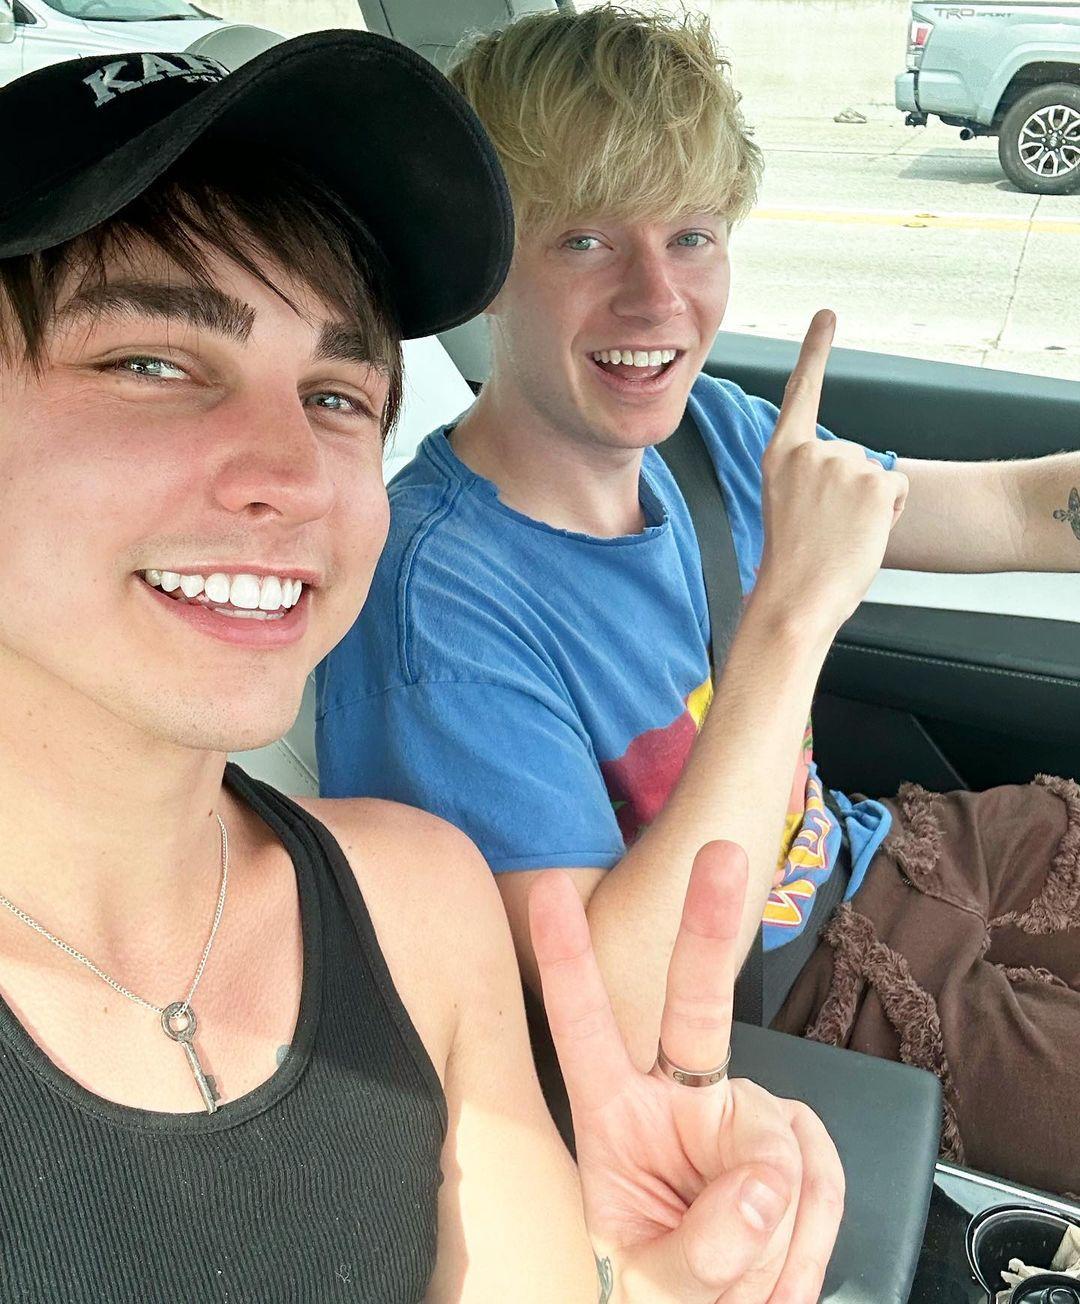 Where Do YouTubers Sam and Colby Live? Details